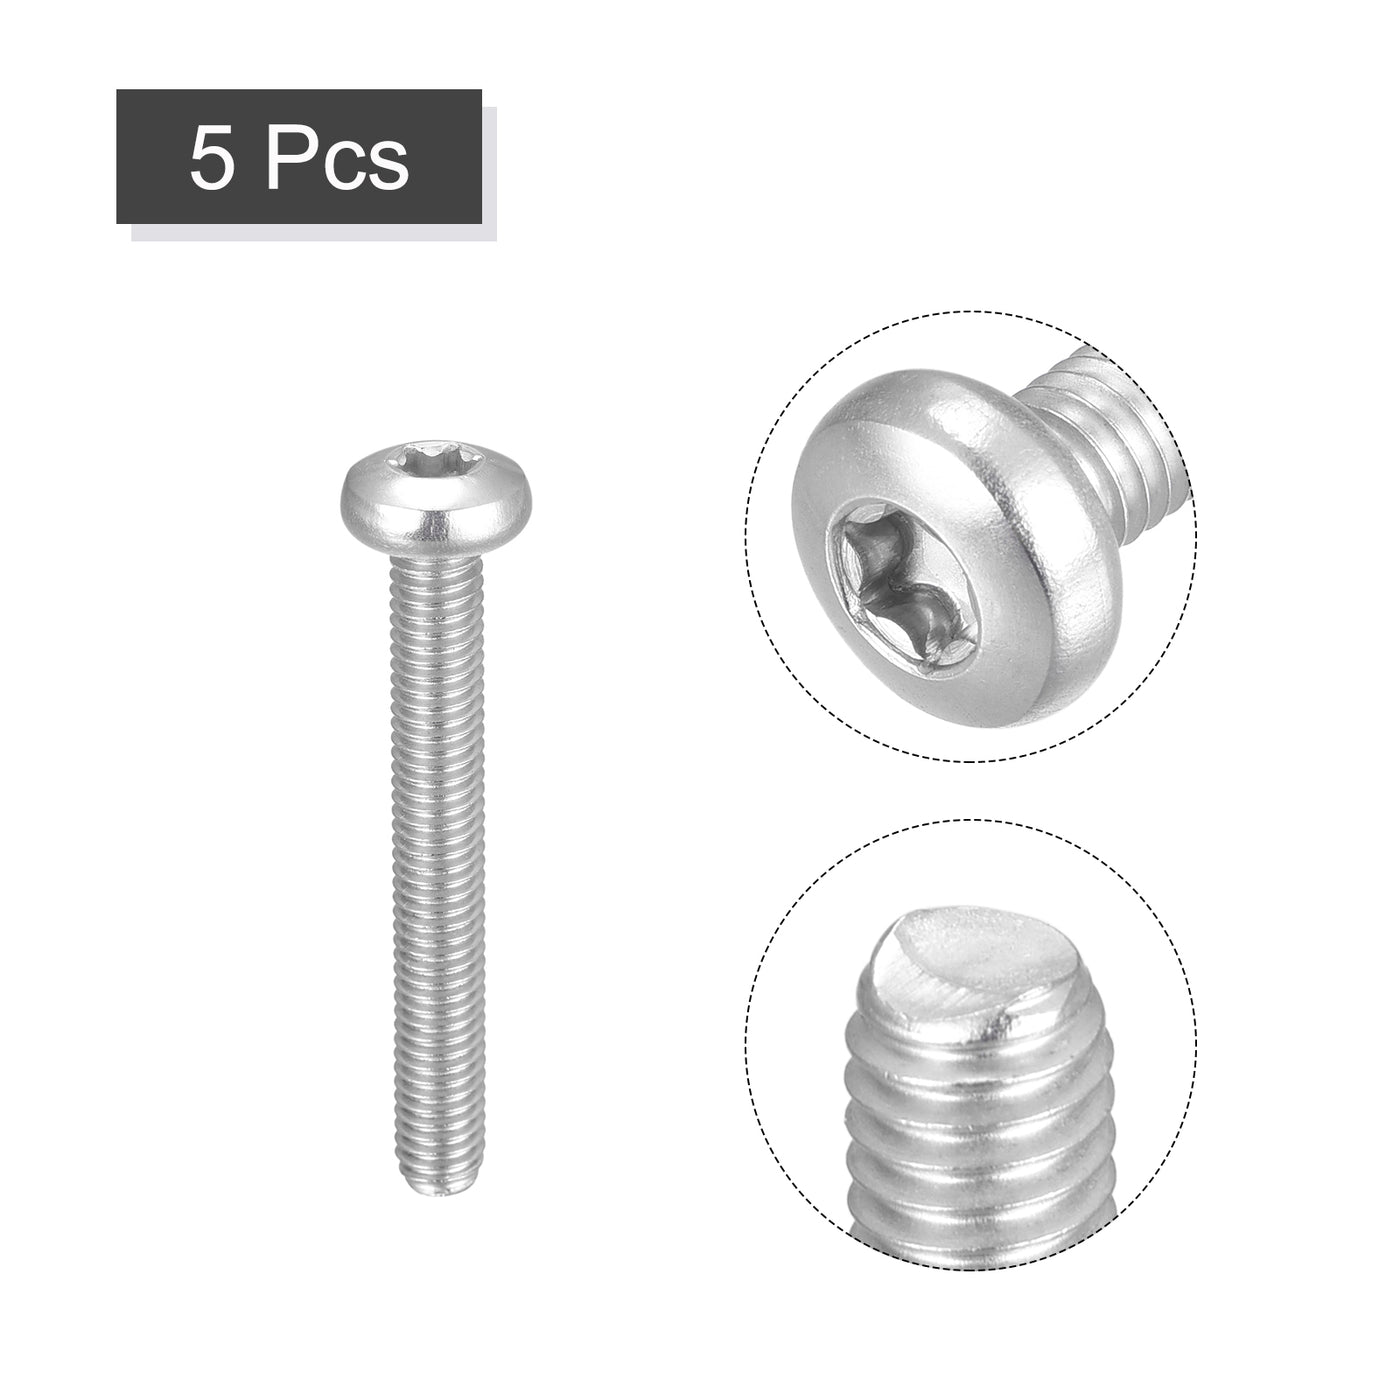 uxcell Uxcell M6x45mm Torx Security Machine Screws, 5pcs 316 Stainless Steel Pan Head Screw